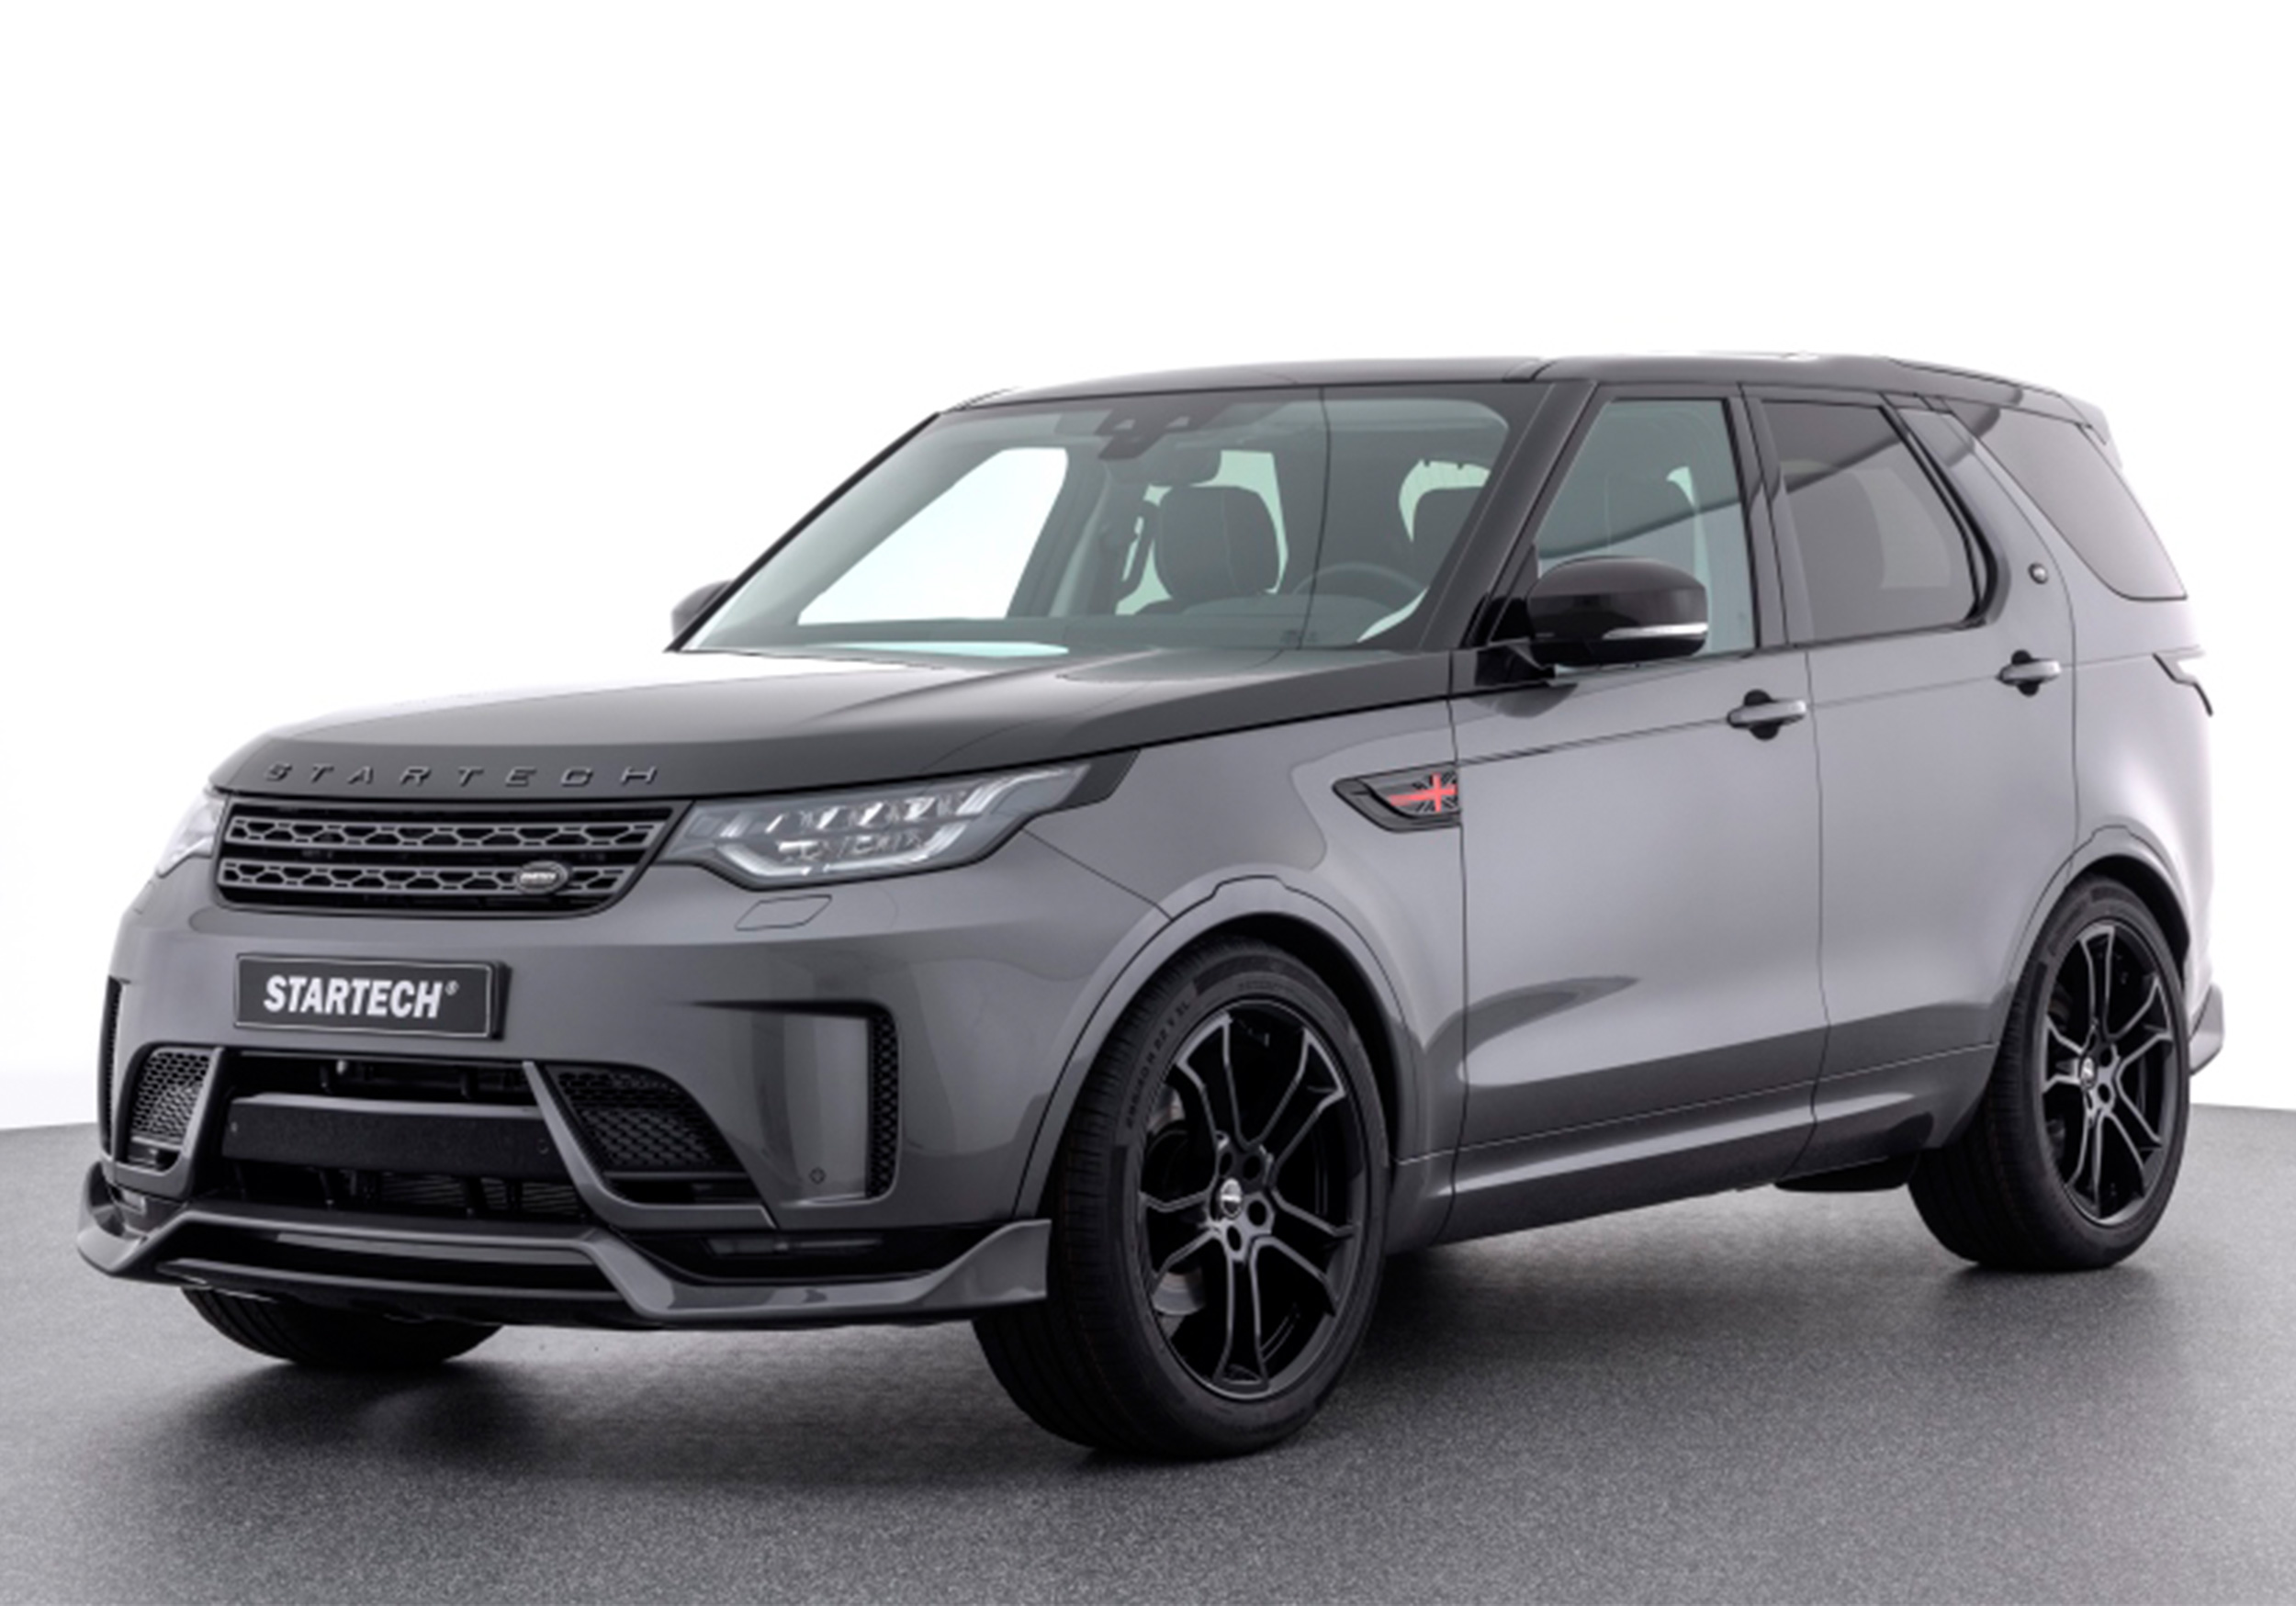 https://www.gericia.com/wp-content/uploads/2020/06/LAND-ROVER-DISCOVERY-5-STARTECH-FRONT-APRON-1.jpg